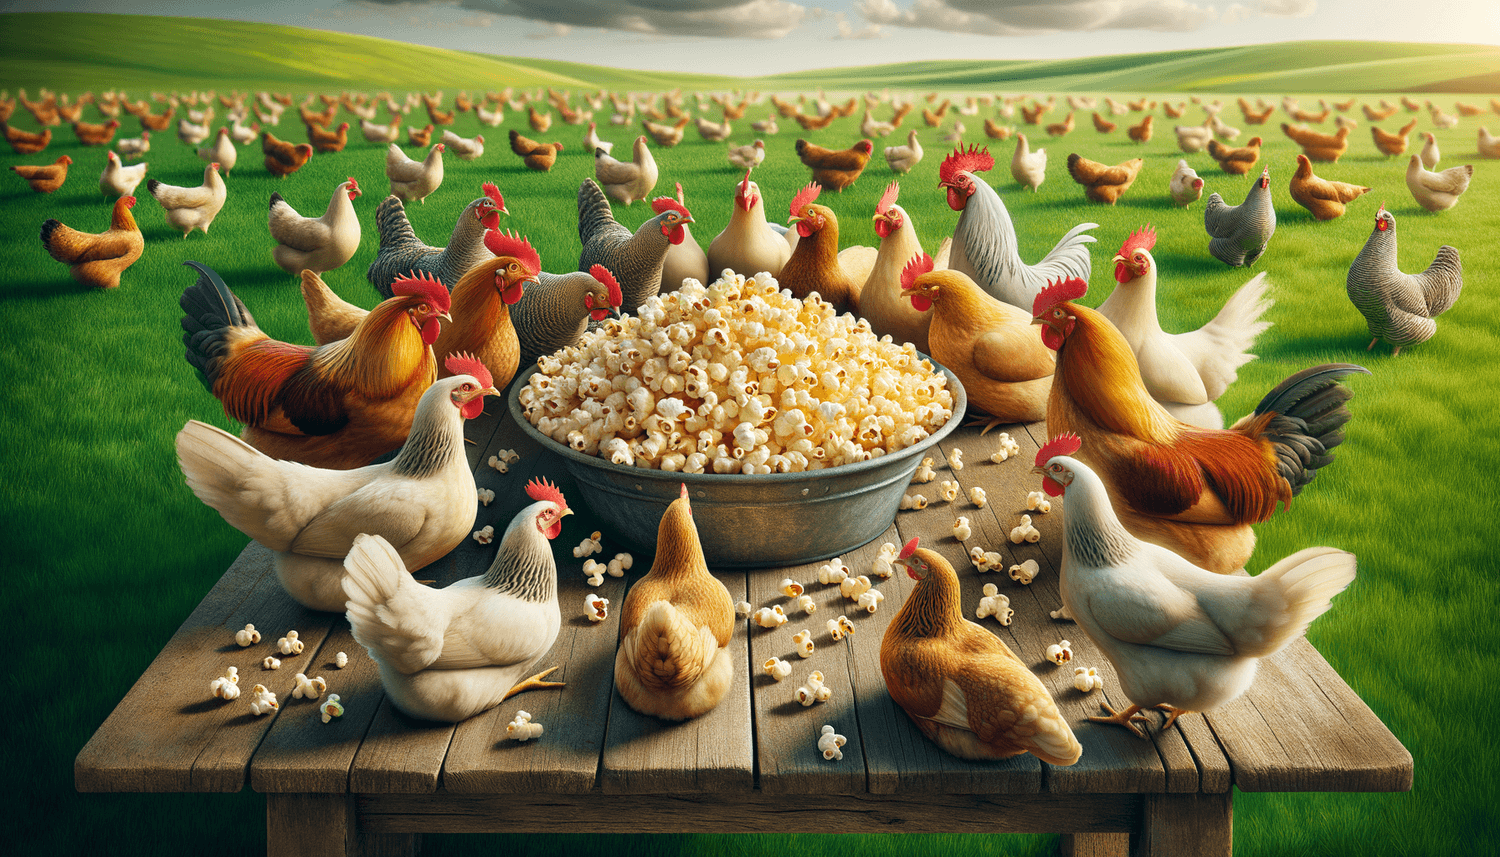 Can Chickens Eat Buttered Popcorn?